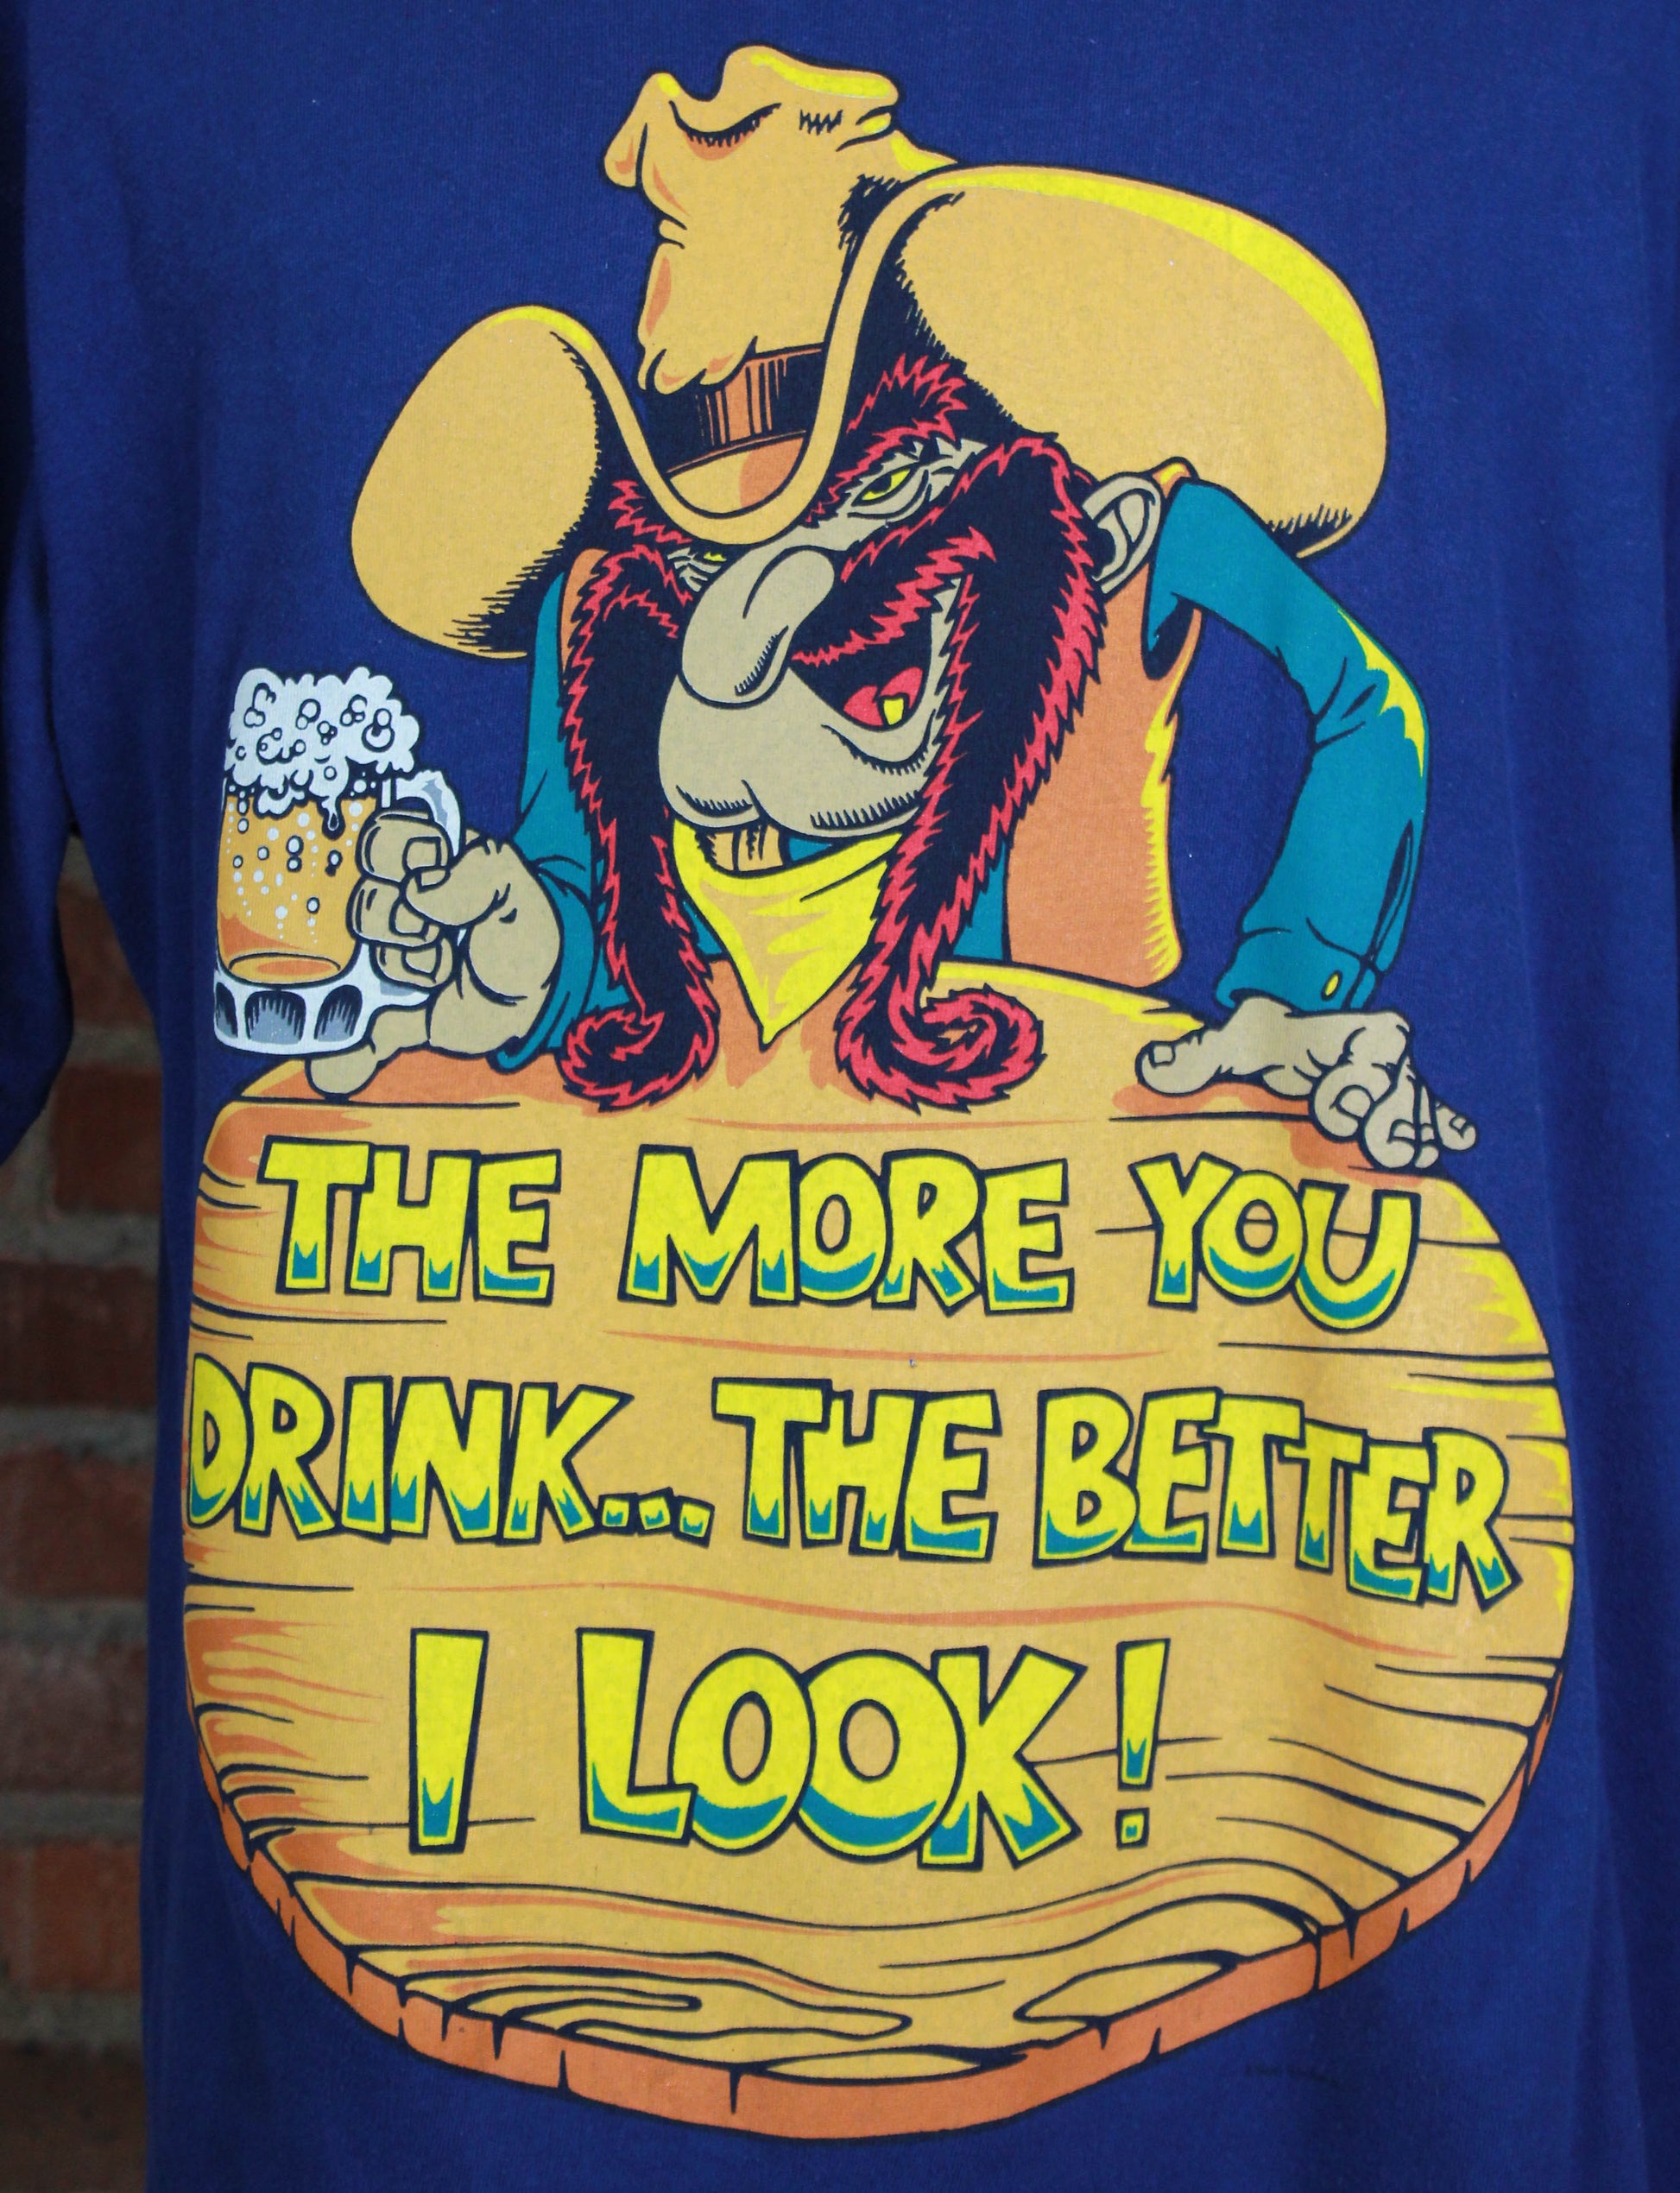 Vintage 90's The More You Drink, The Better I Look Graphic T Shirt Navy Blue Unisex Large/XL